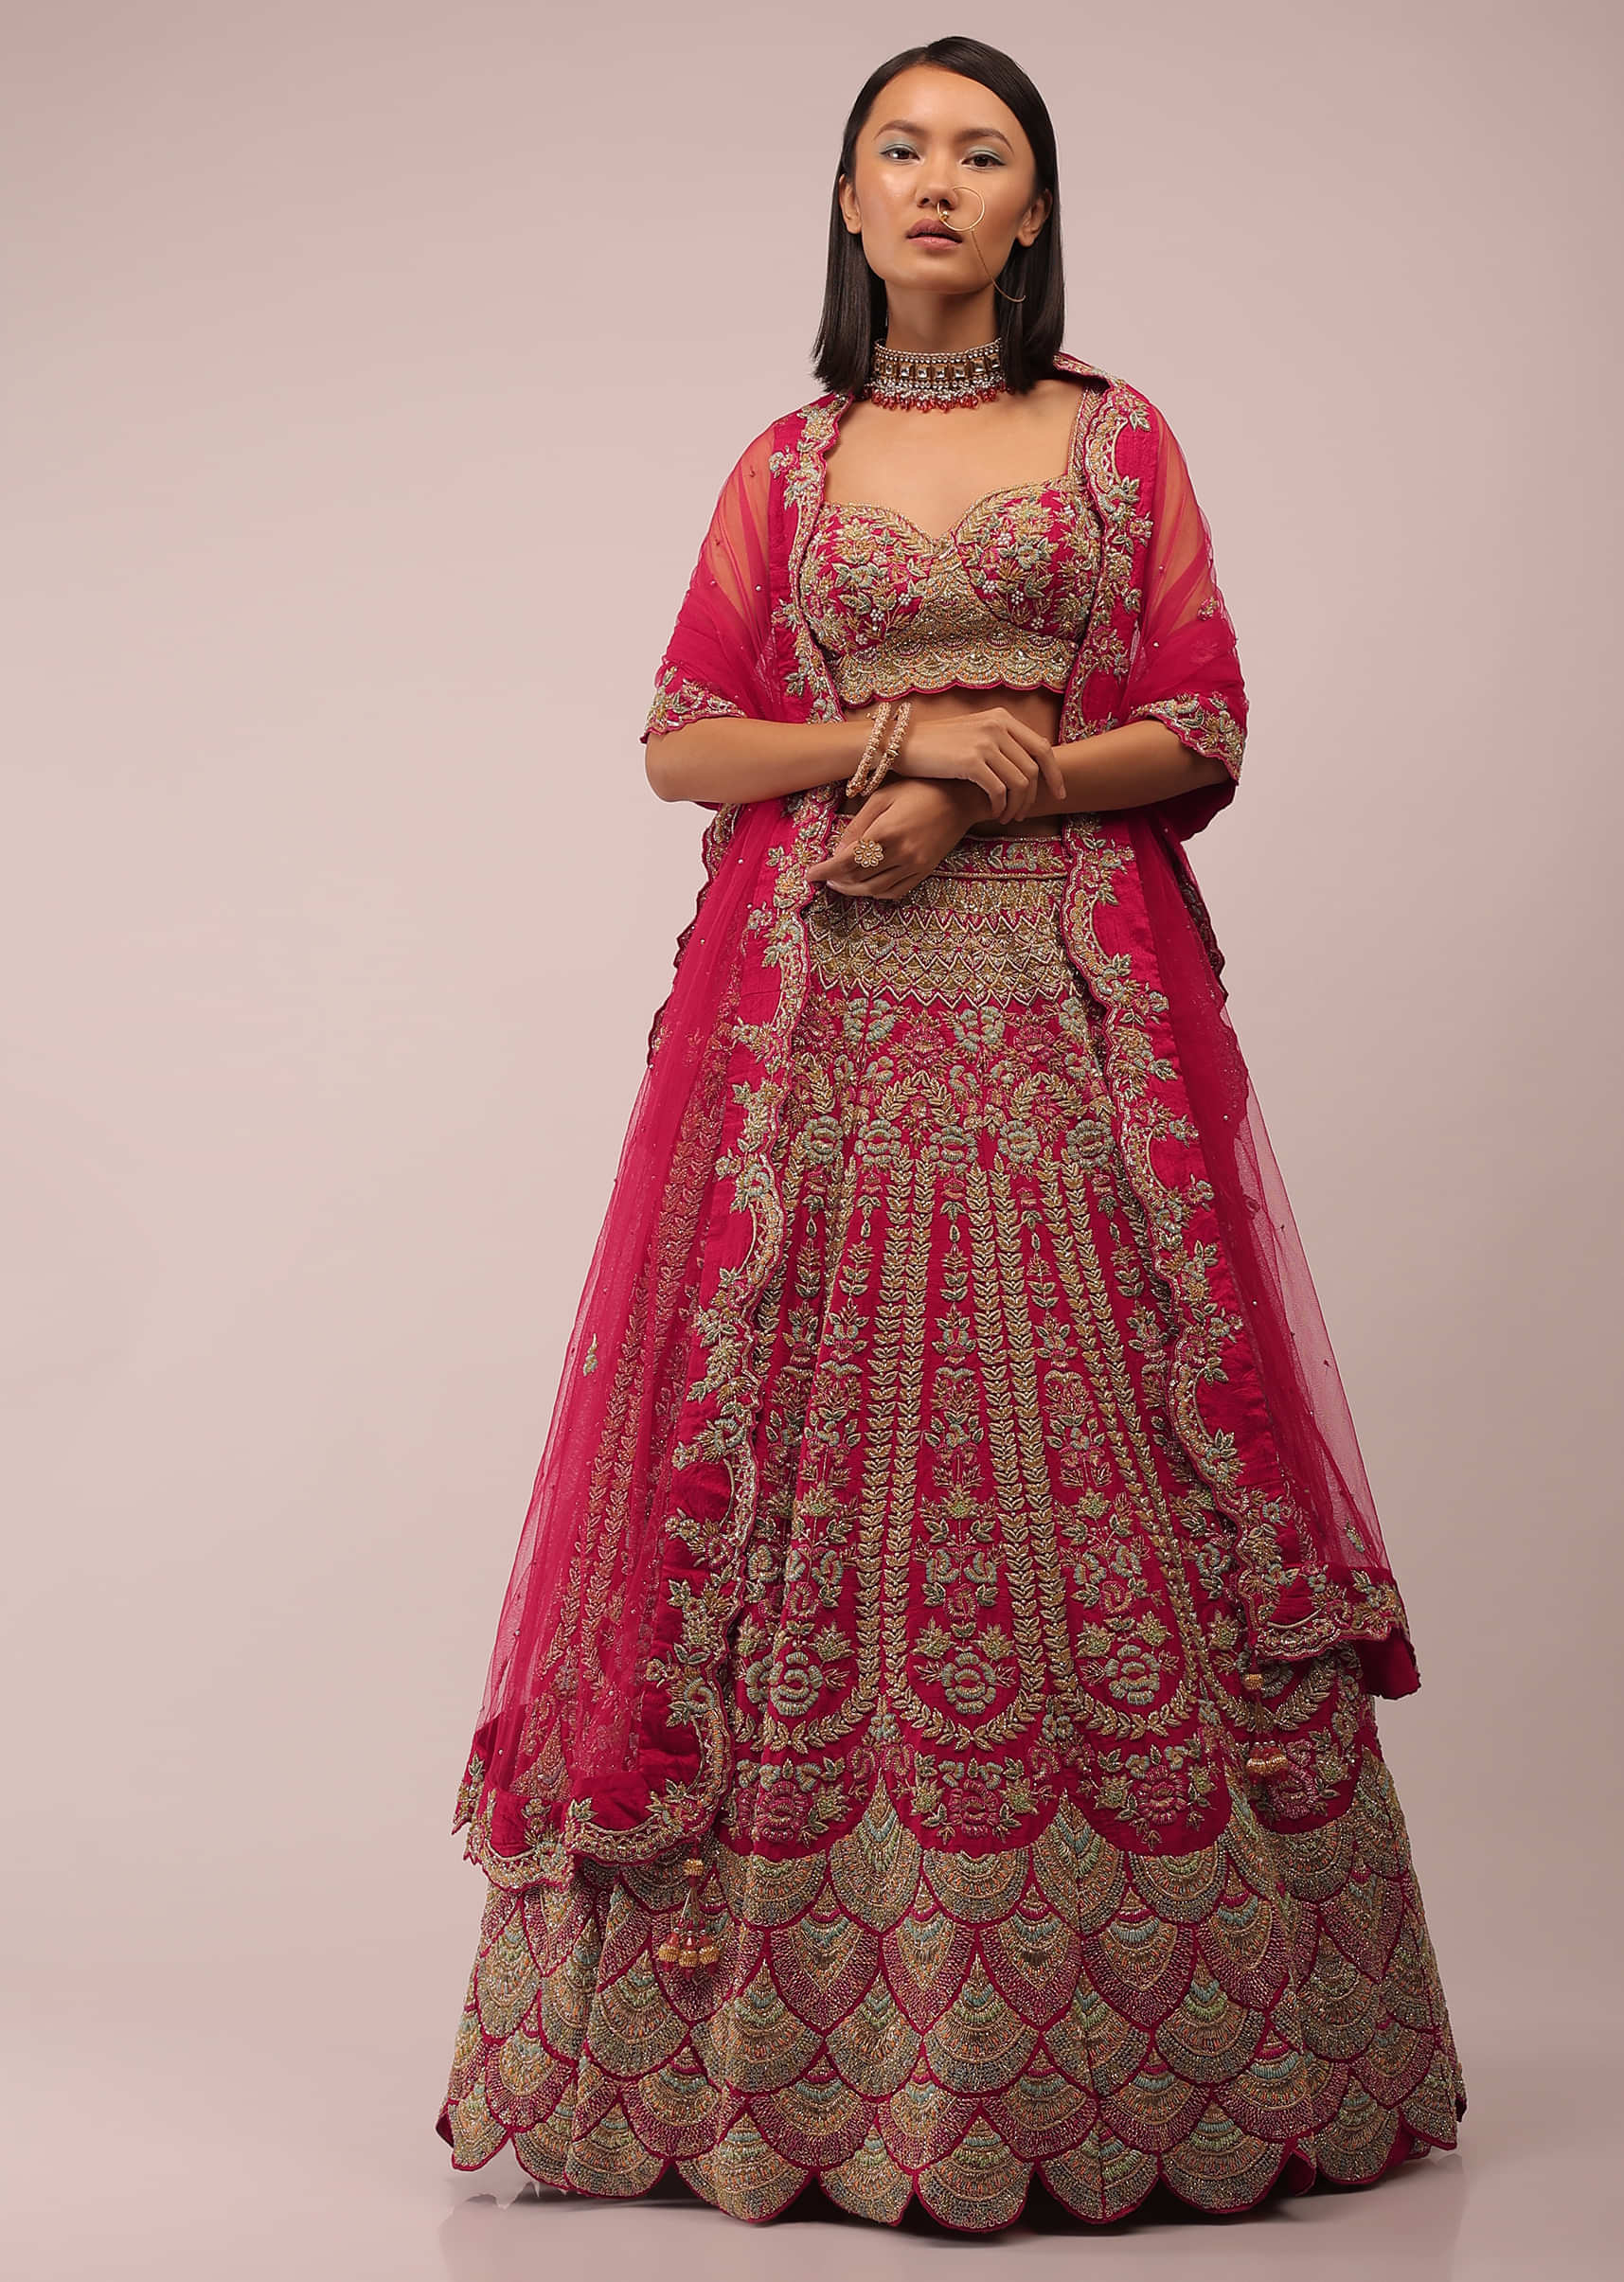 Rani Pink Lehenga In Mughal Inspired Architecture Embroidery In Kalidar Motifs,Crafted In Raw Silk With Multi Color Beads,And Zardozi In Scallops